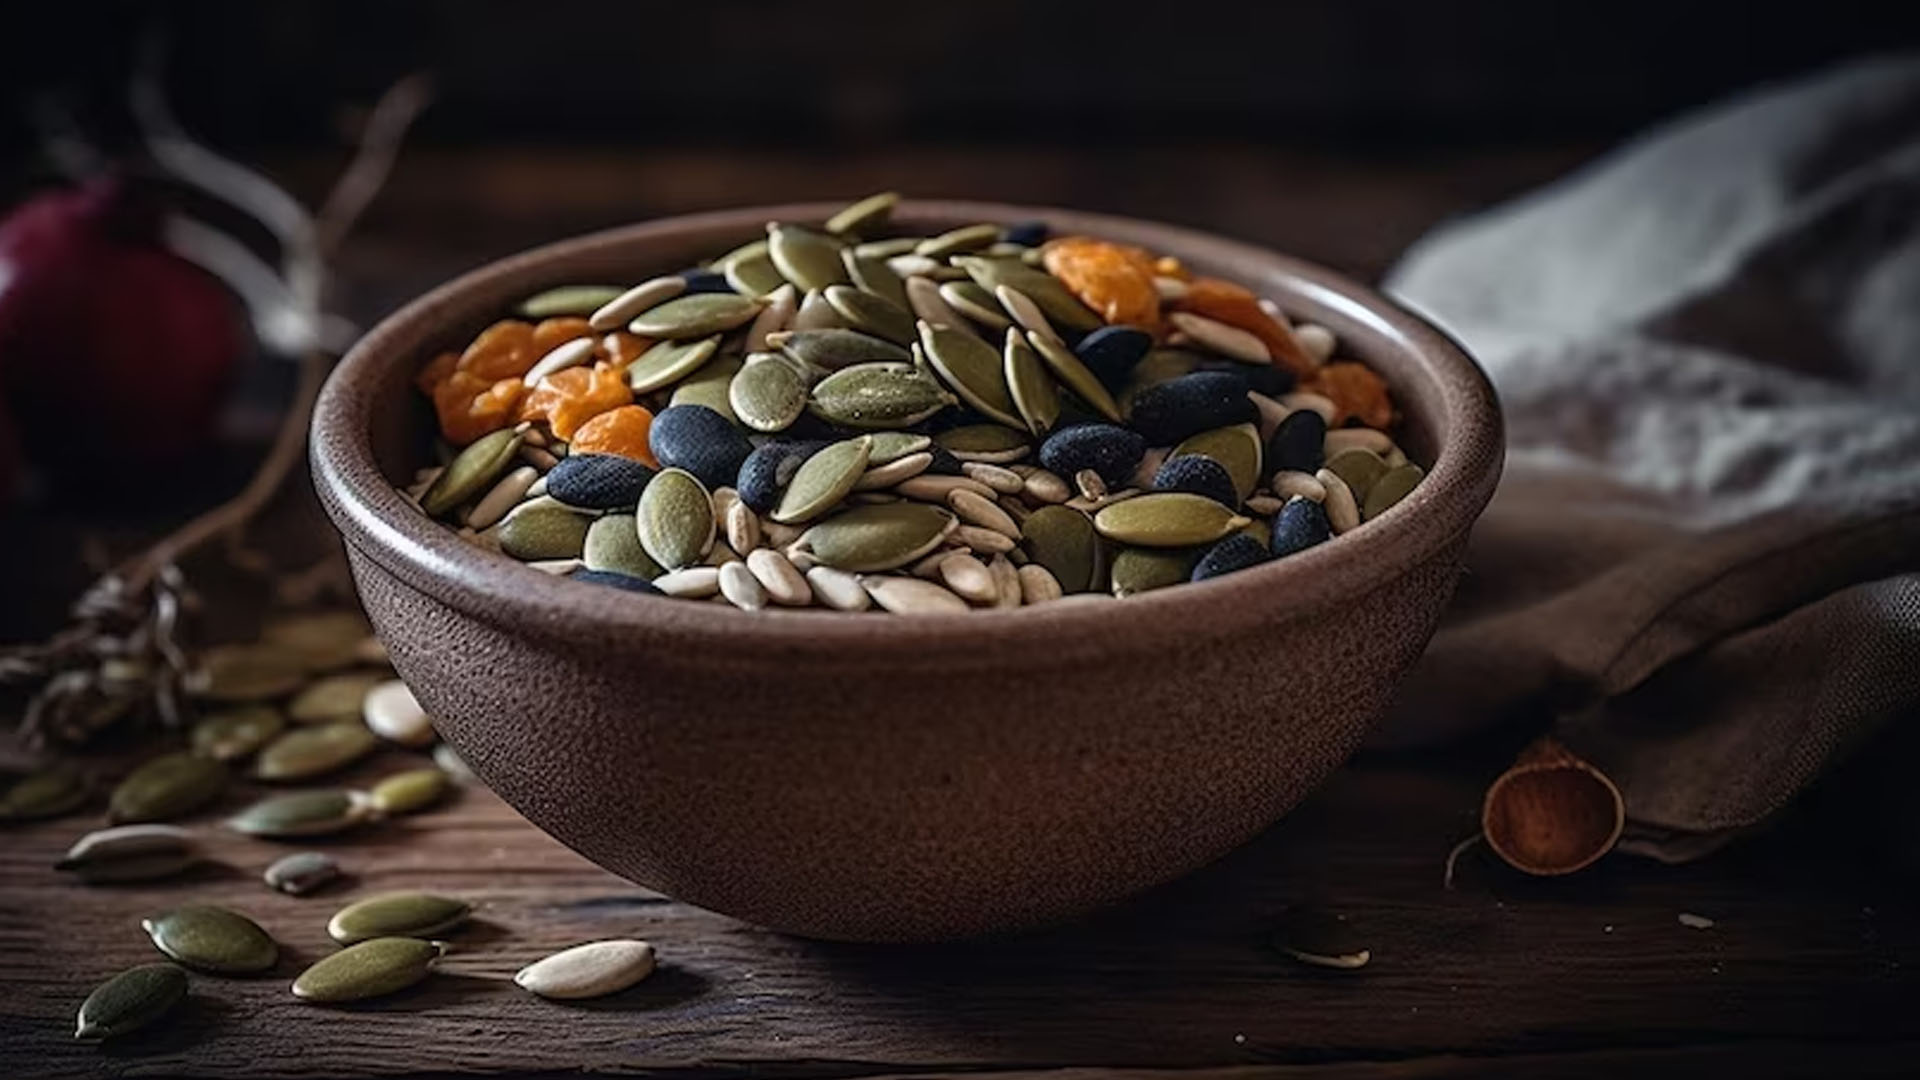 What Are The Health Benefits of Pumpkin Seeds?